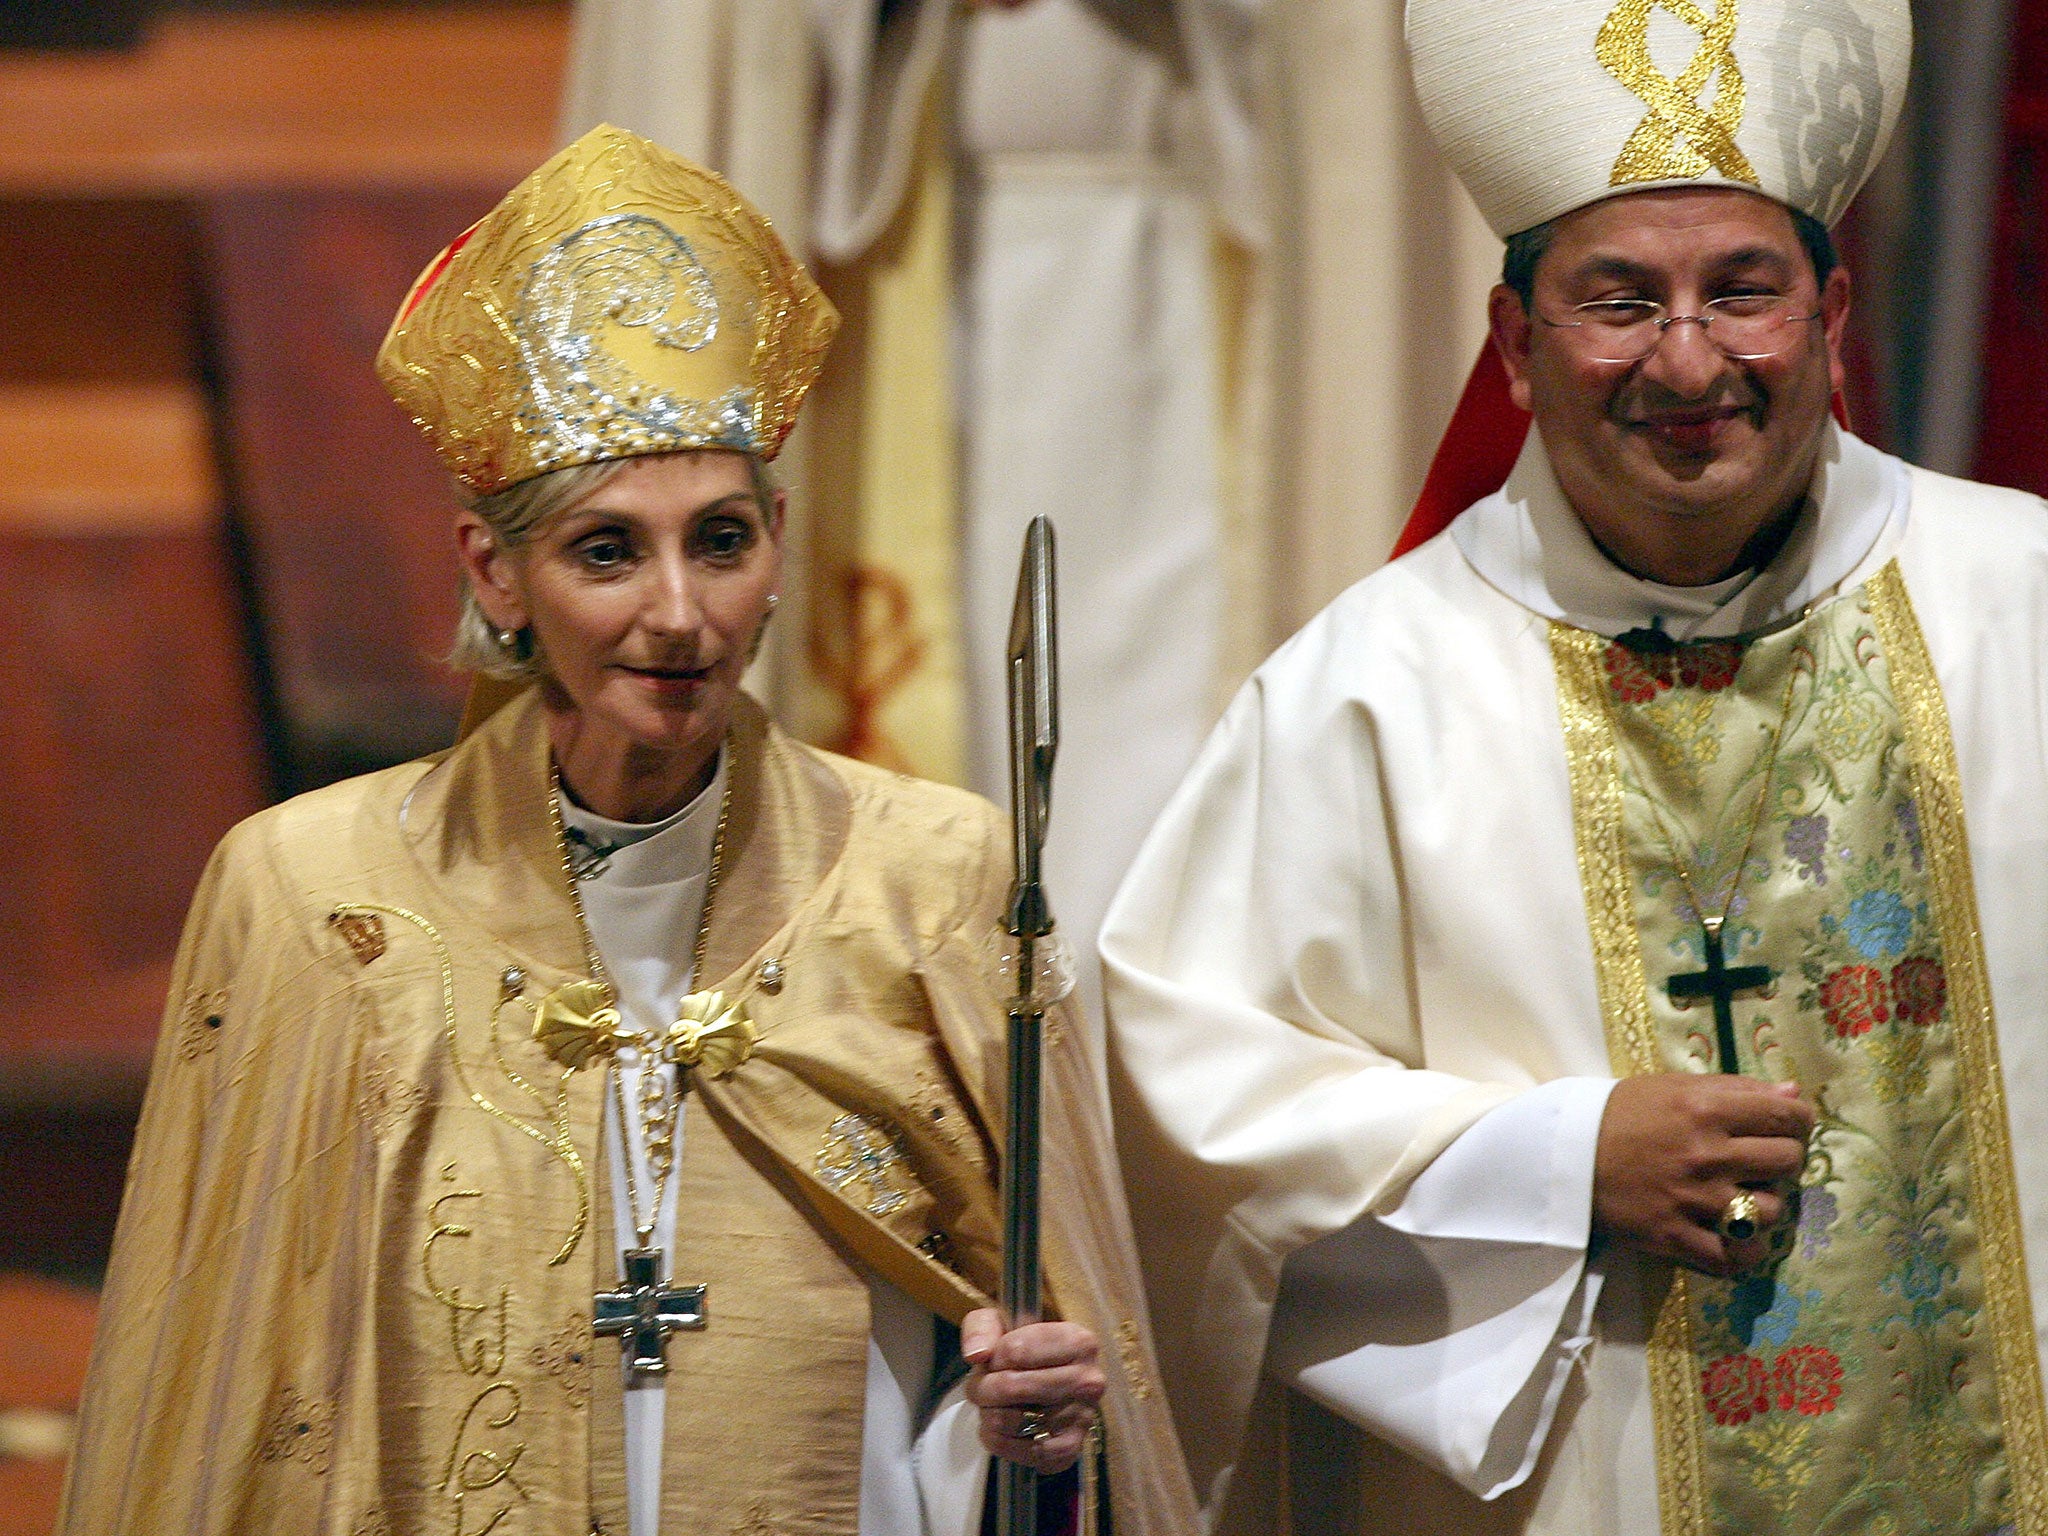 The Right Reverend Kay Goldsworthy, left, was ordained in 2008 as Australia's first Anglican bishop